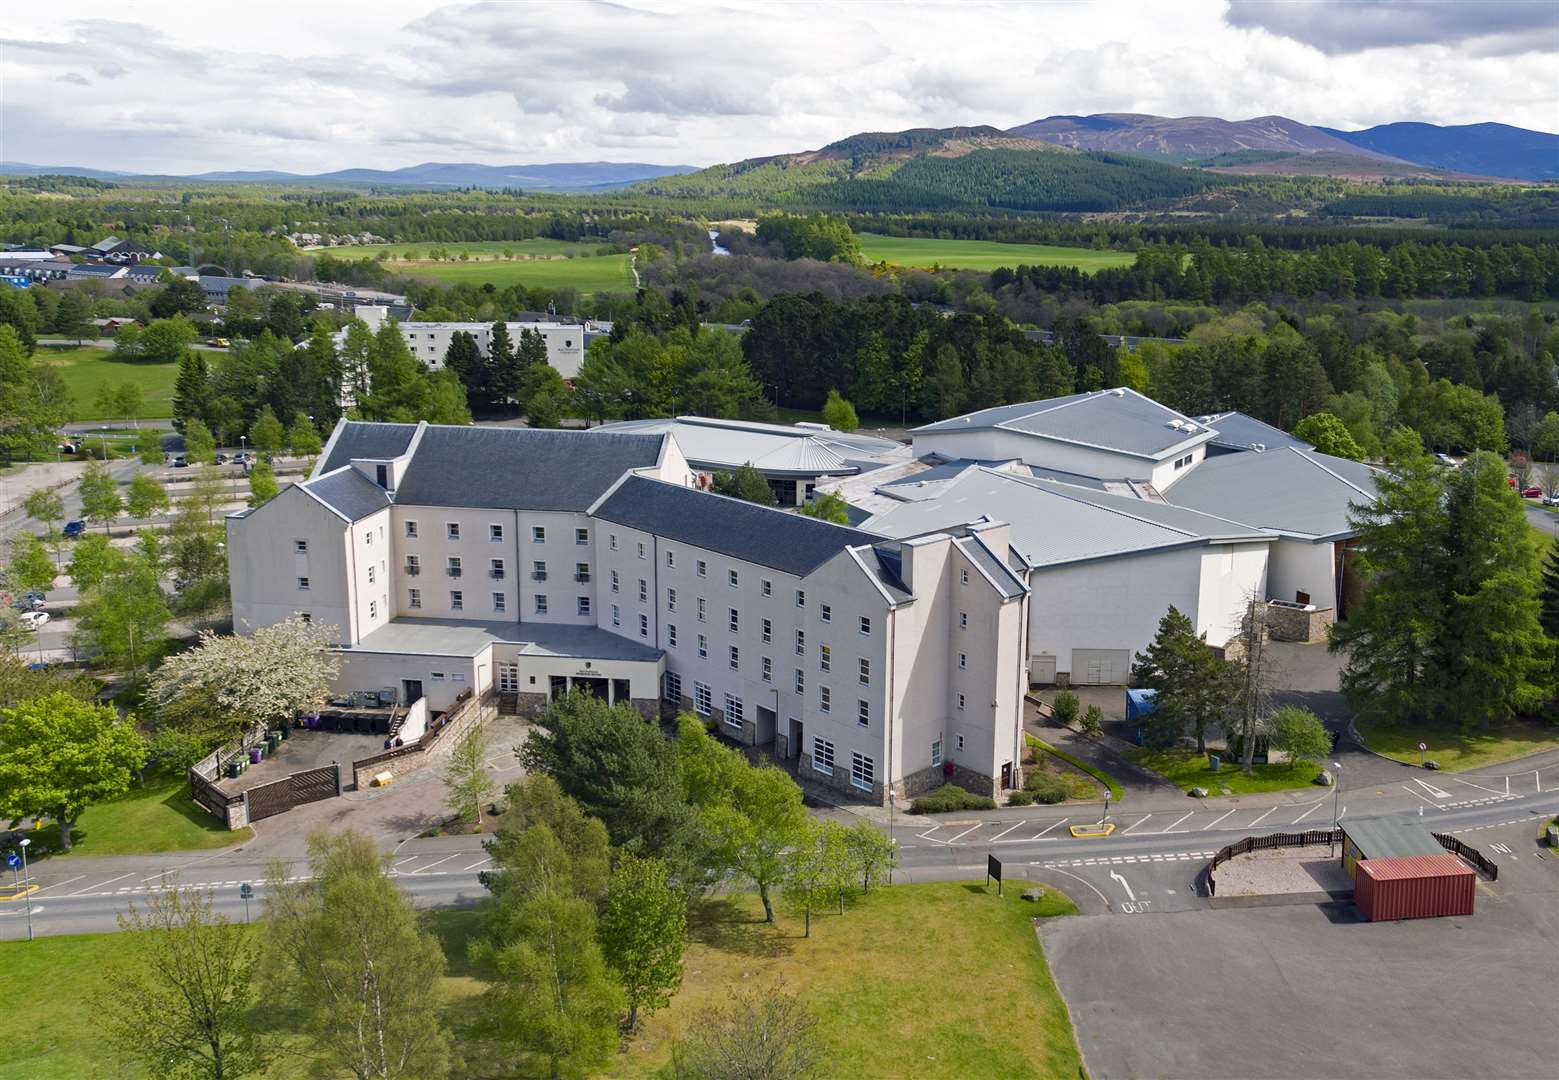 The Macdonald Aviemore Resort is the perfect base for an Easter getaway in the Cairngorms National Park.